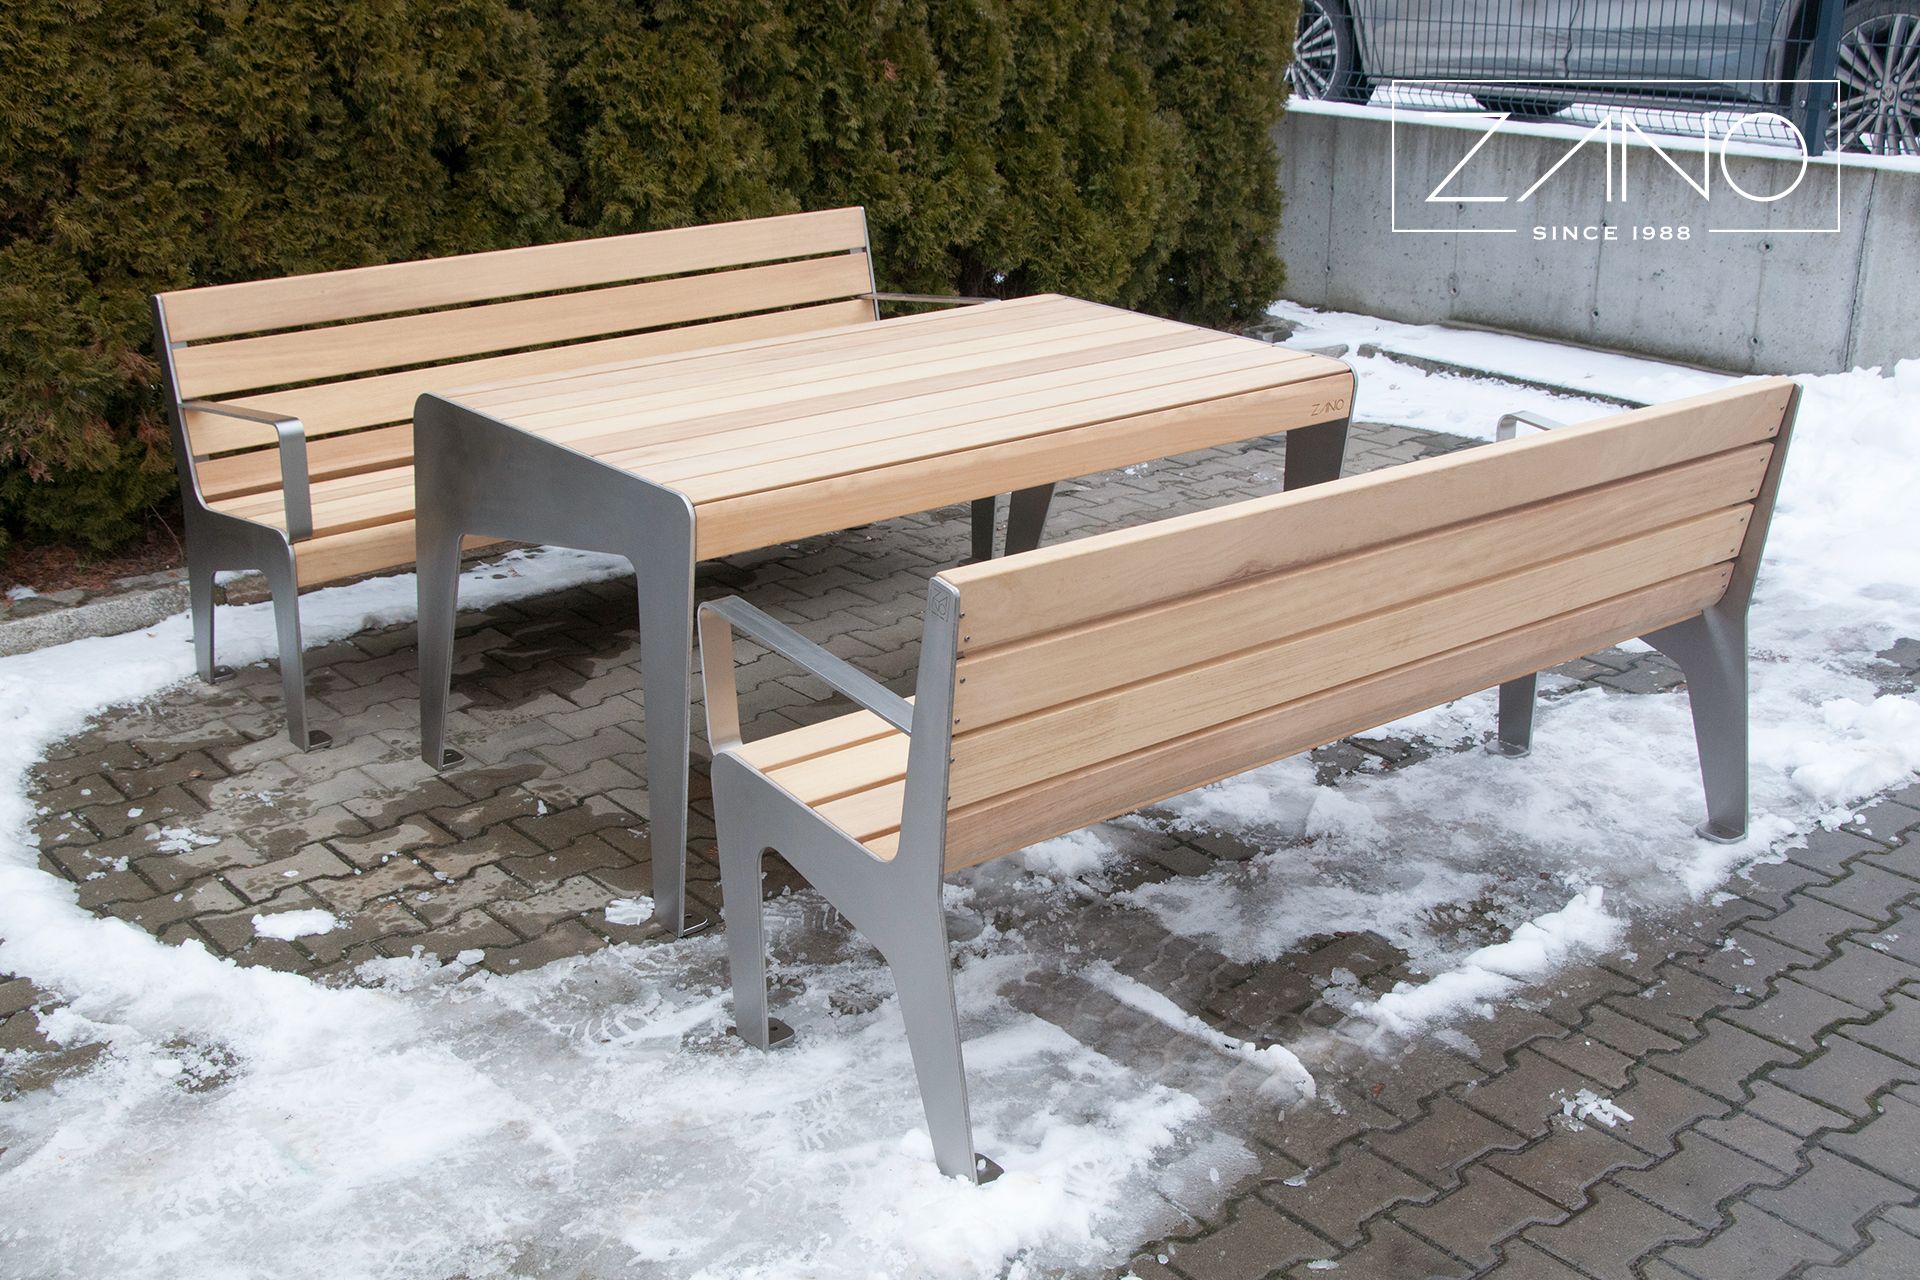 Park table and bench made of stainless steel and hardwood